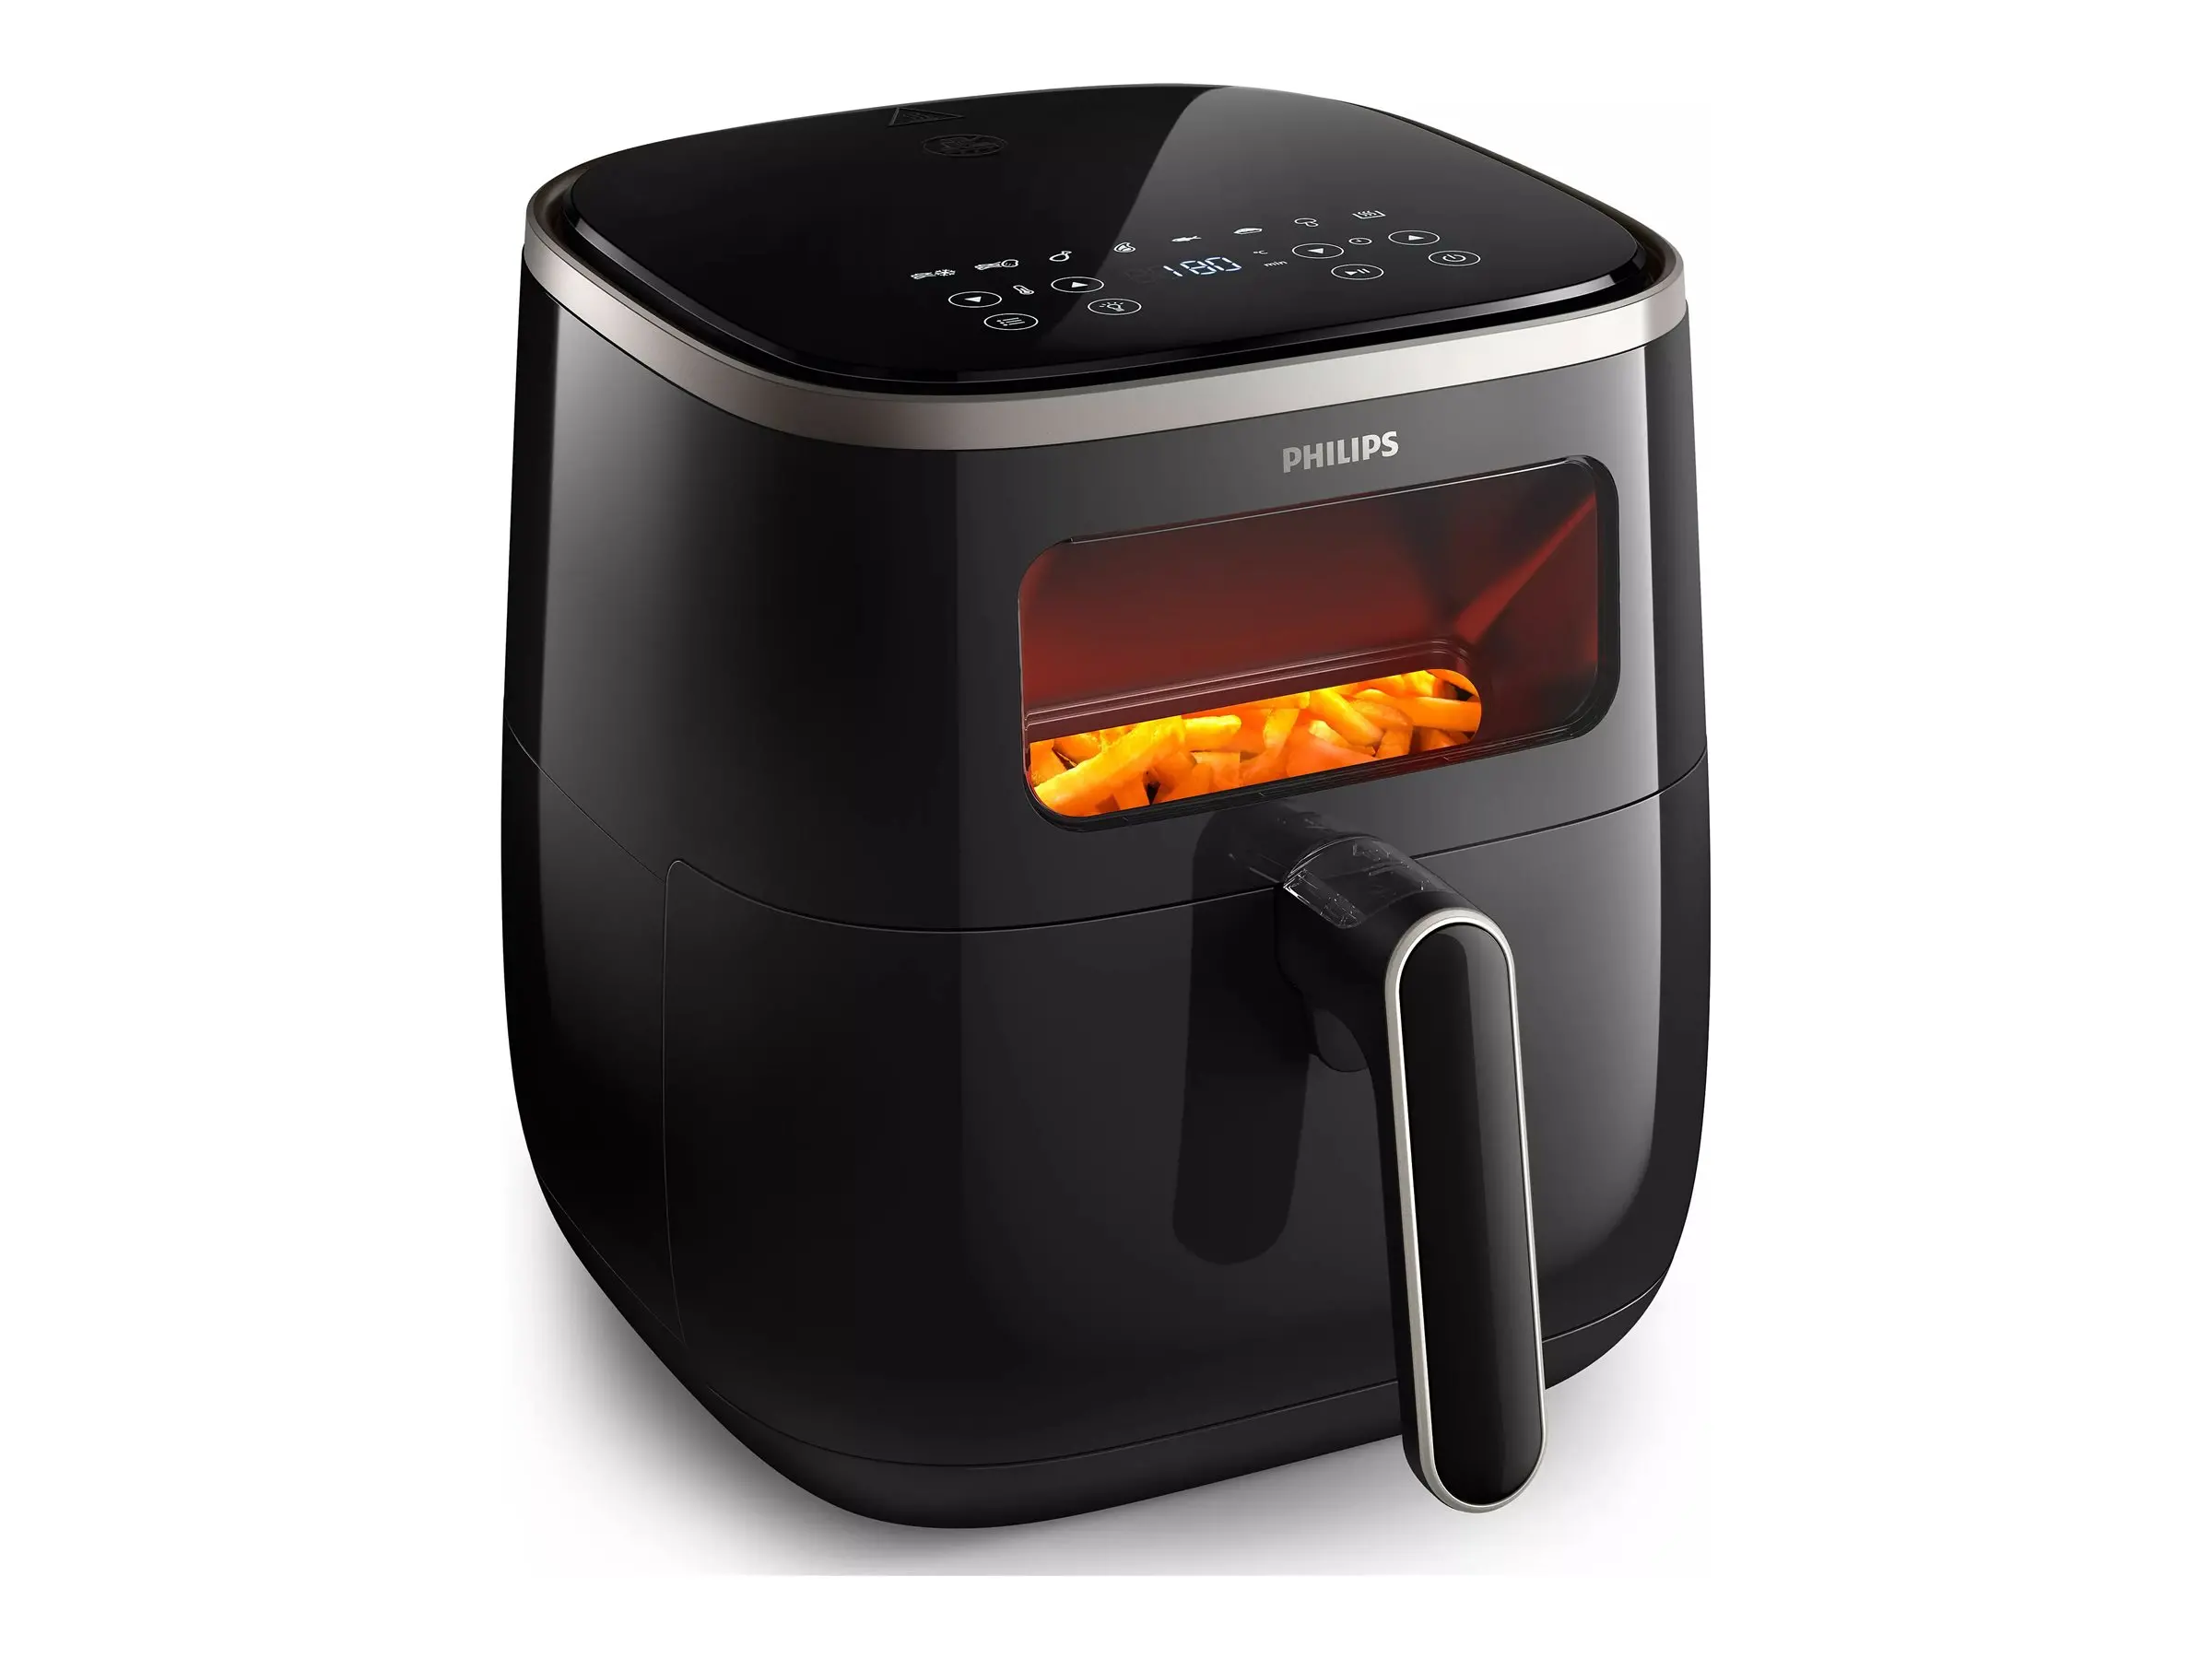 PHILIPS Airfryer 5.6L 1700W see though window NutriU App black - image 2